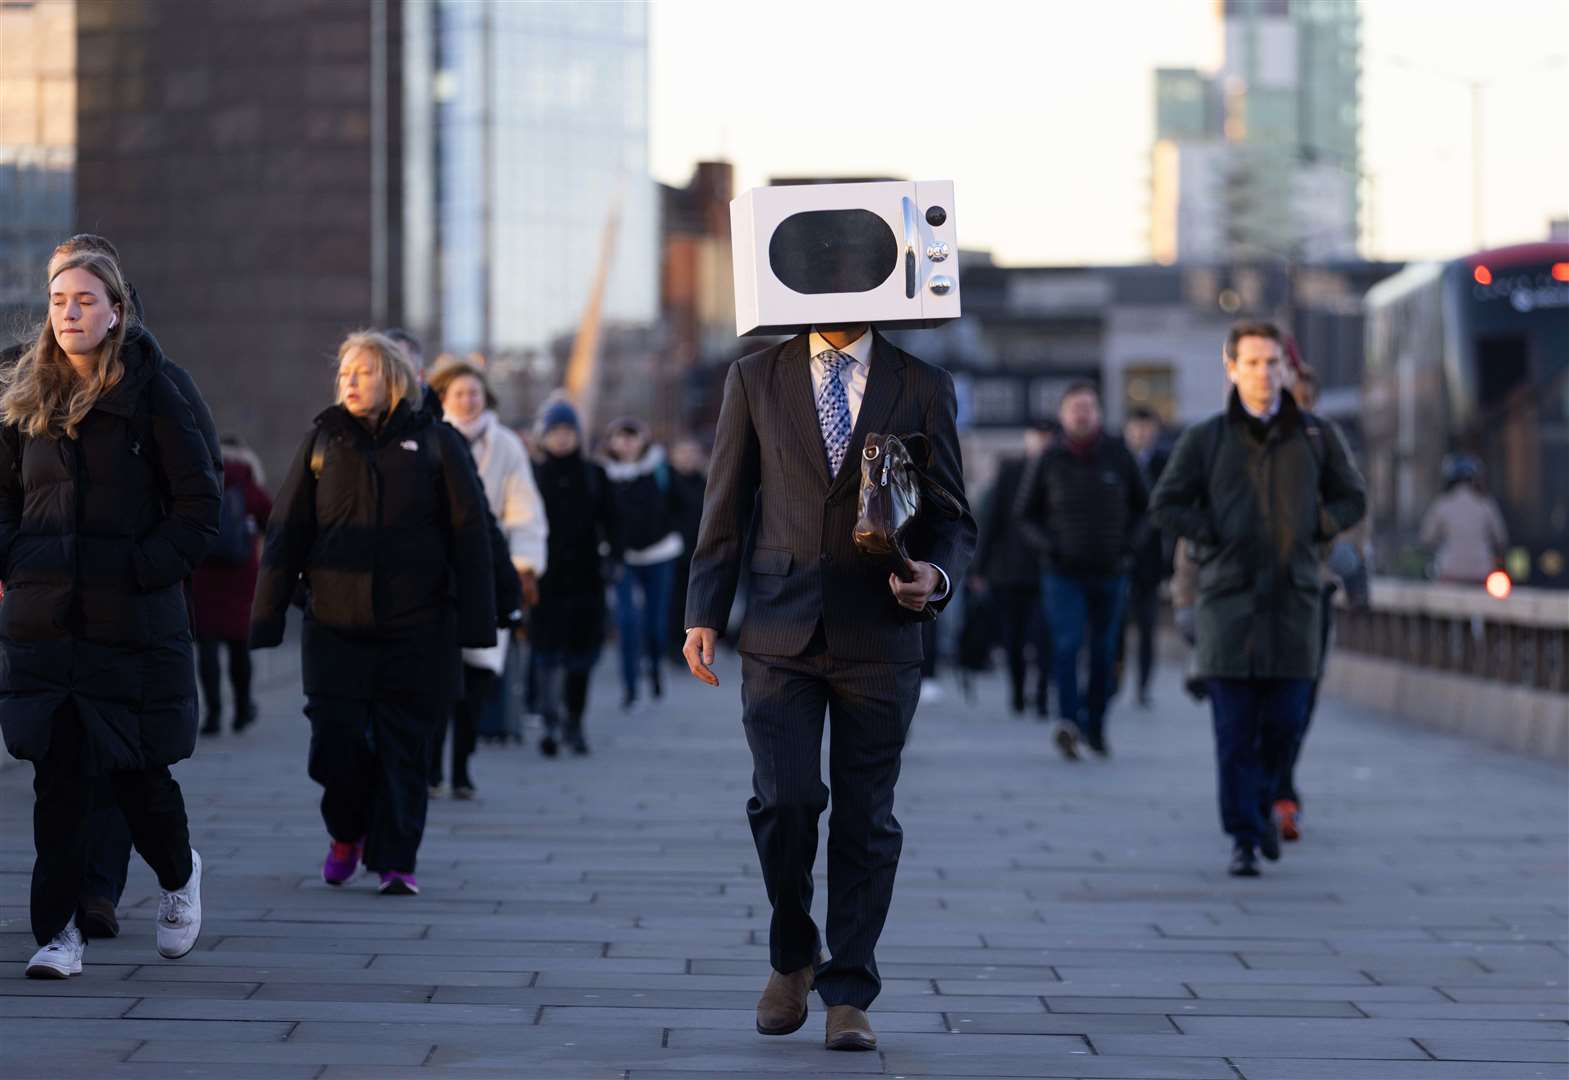 A man on London Bridge in central London with a microwave on his head (David Parry/PA)